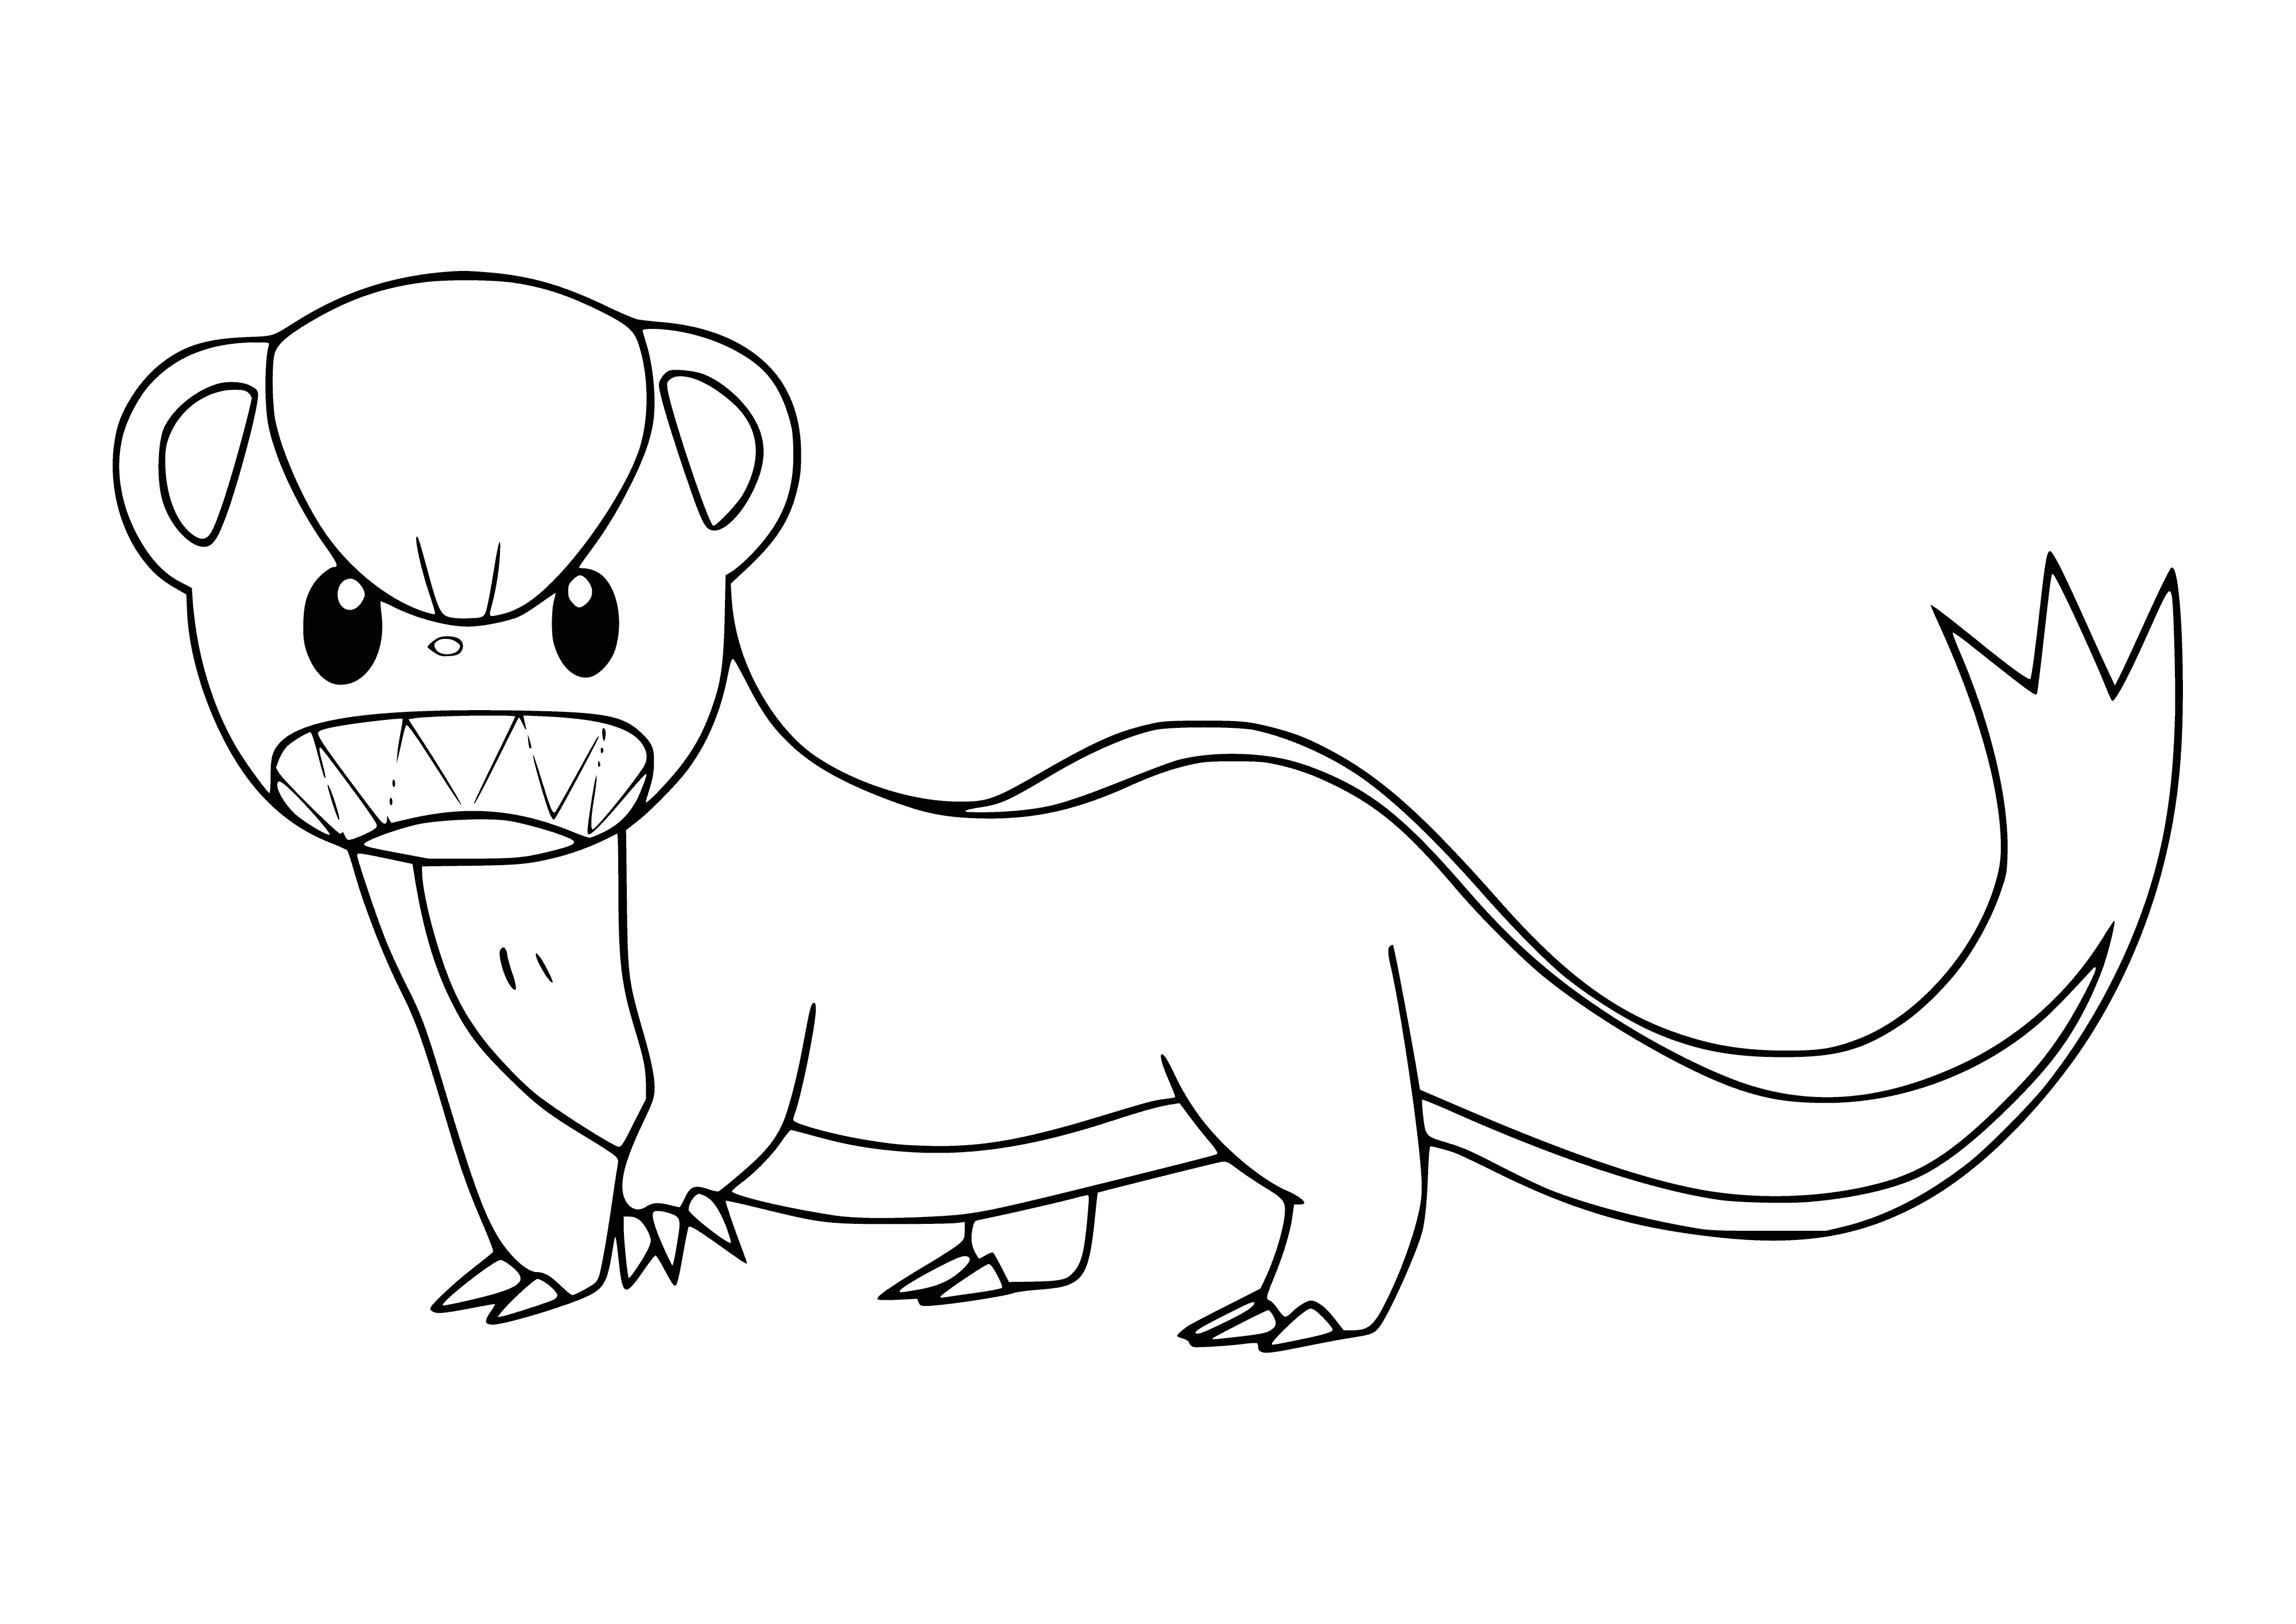 coloring page: Small, brown Normal type Pokemon w/large mouth, sharp teeth, beige tail, & black stripes/bands.